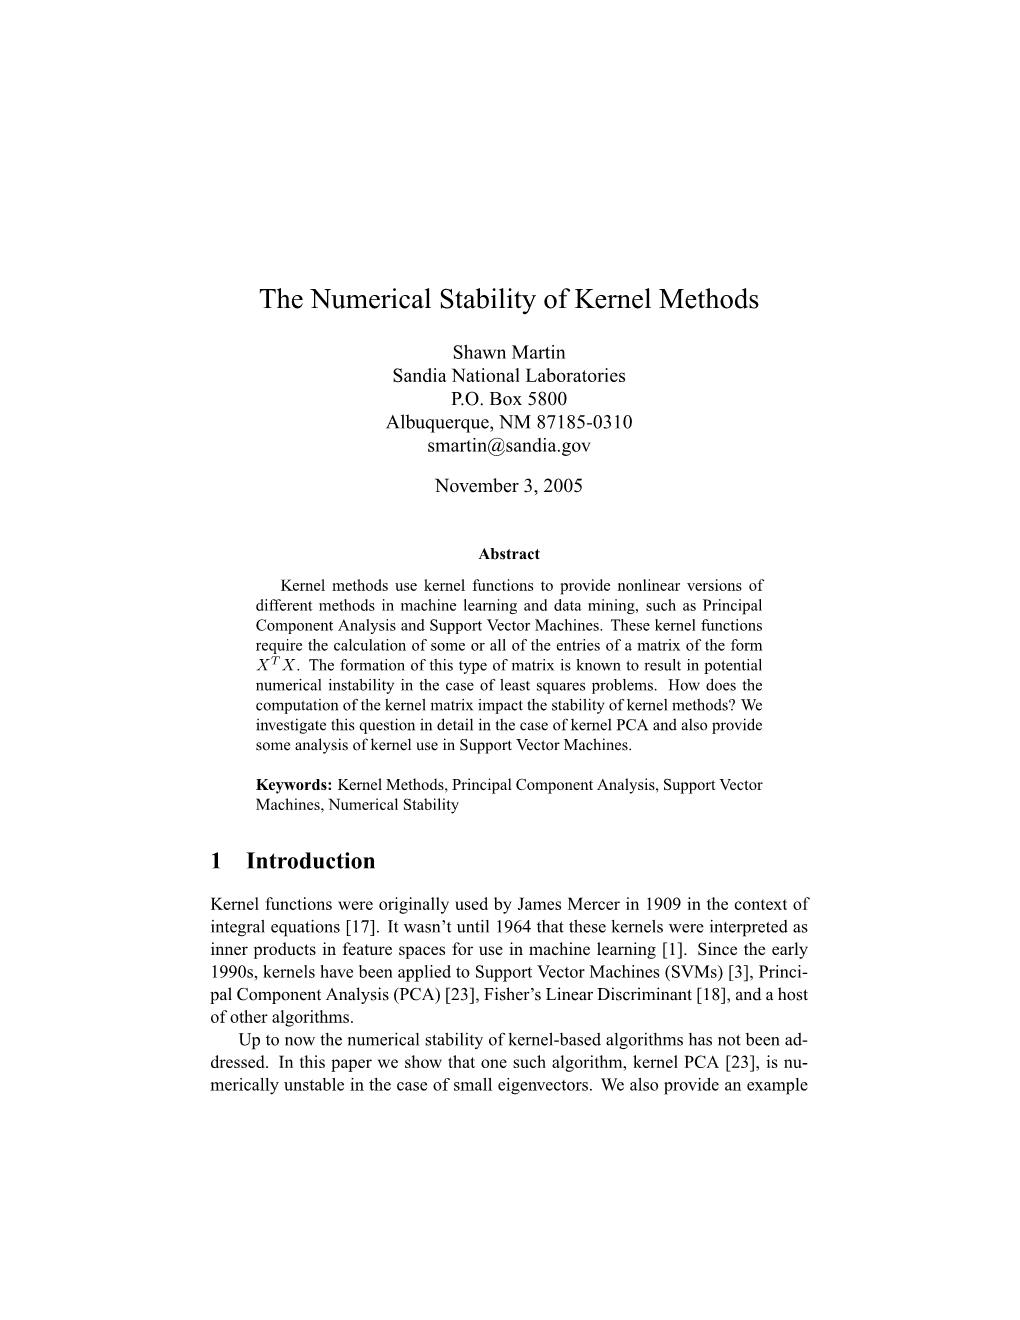 The Numerical Stability of Kernel Methods